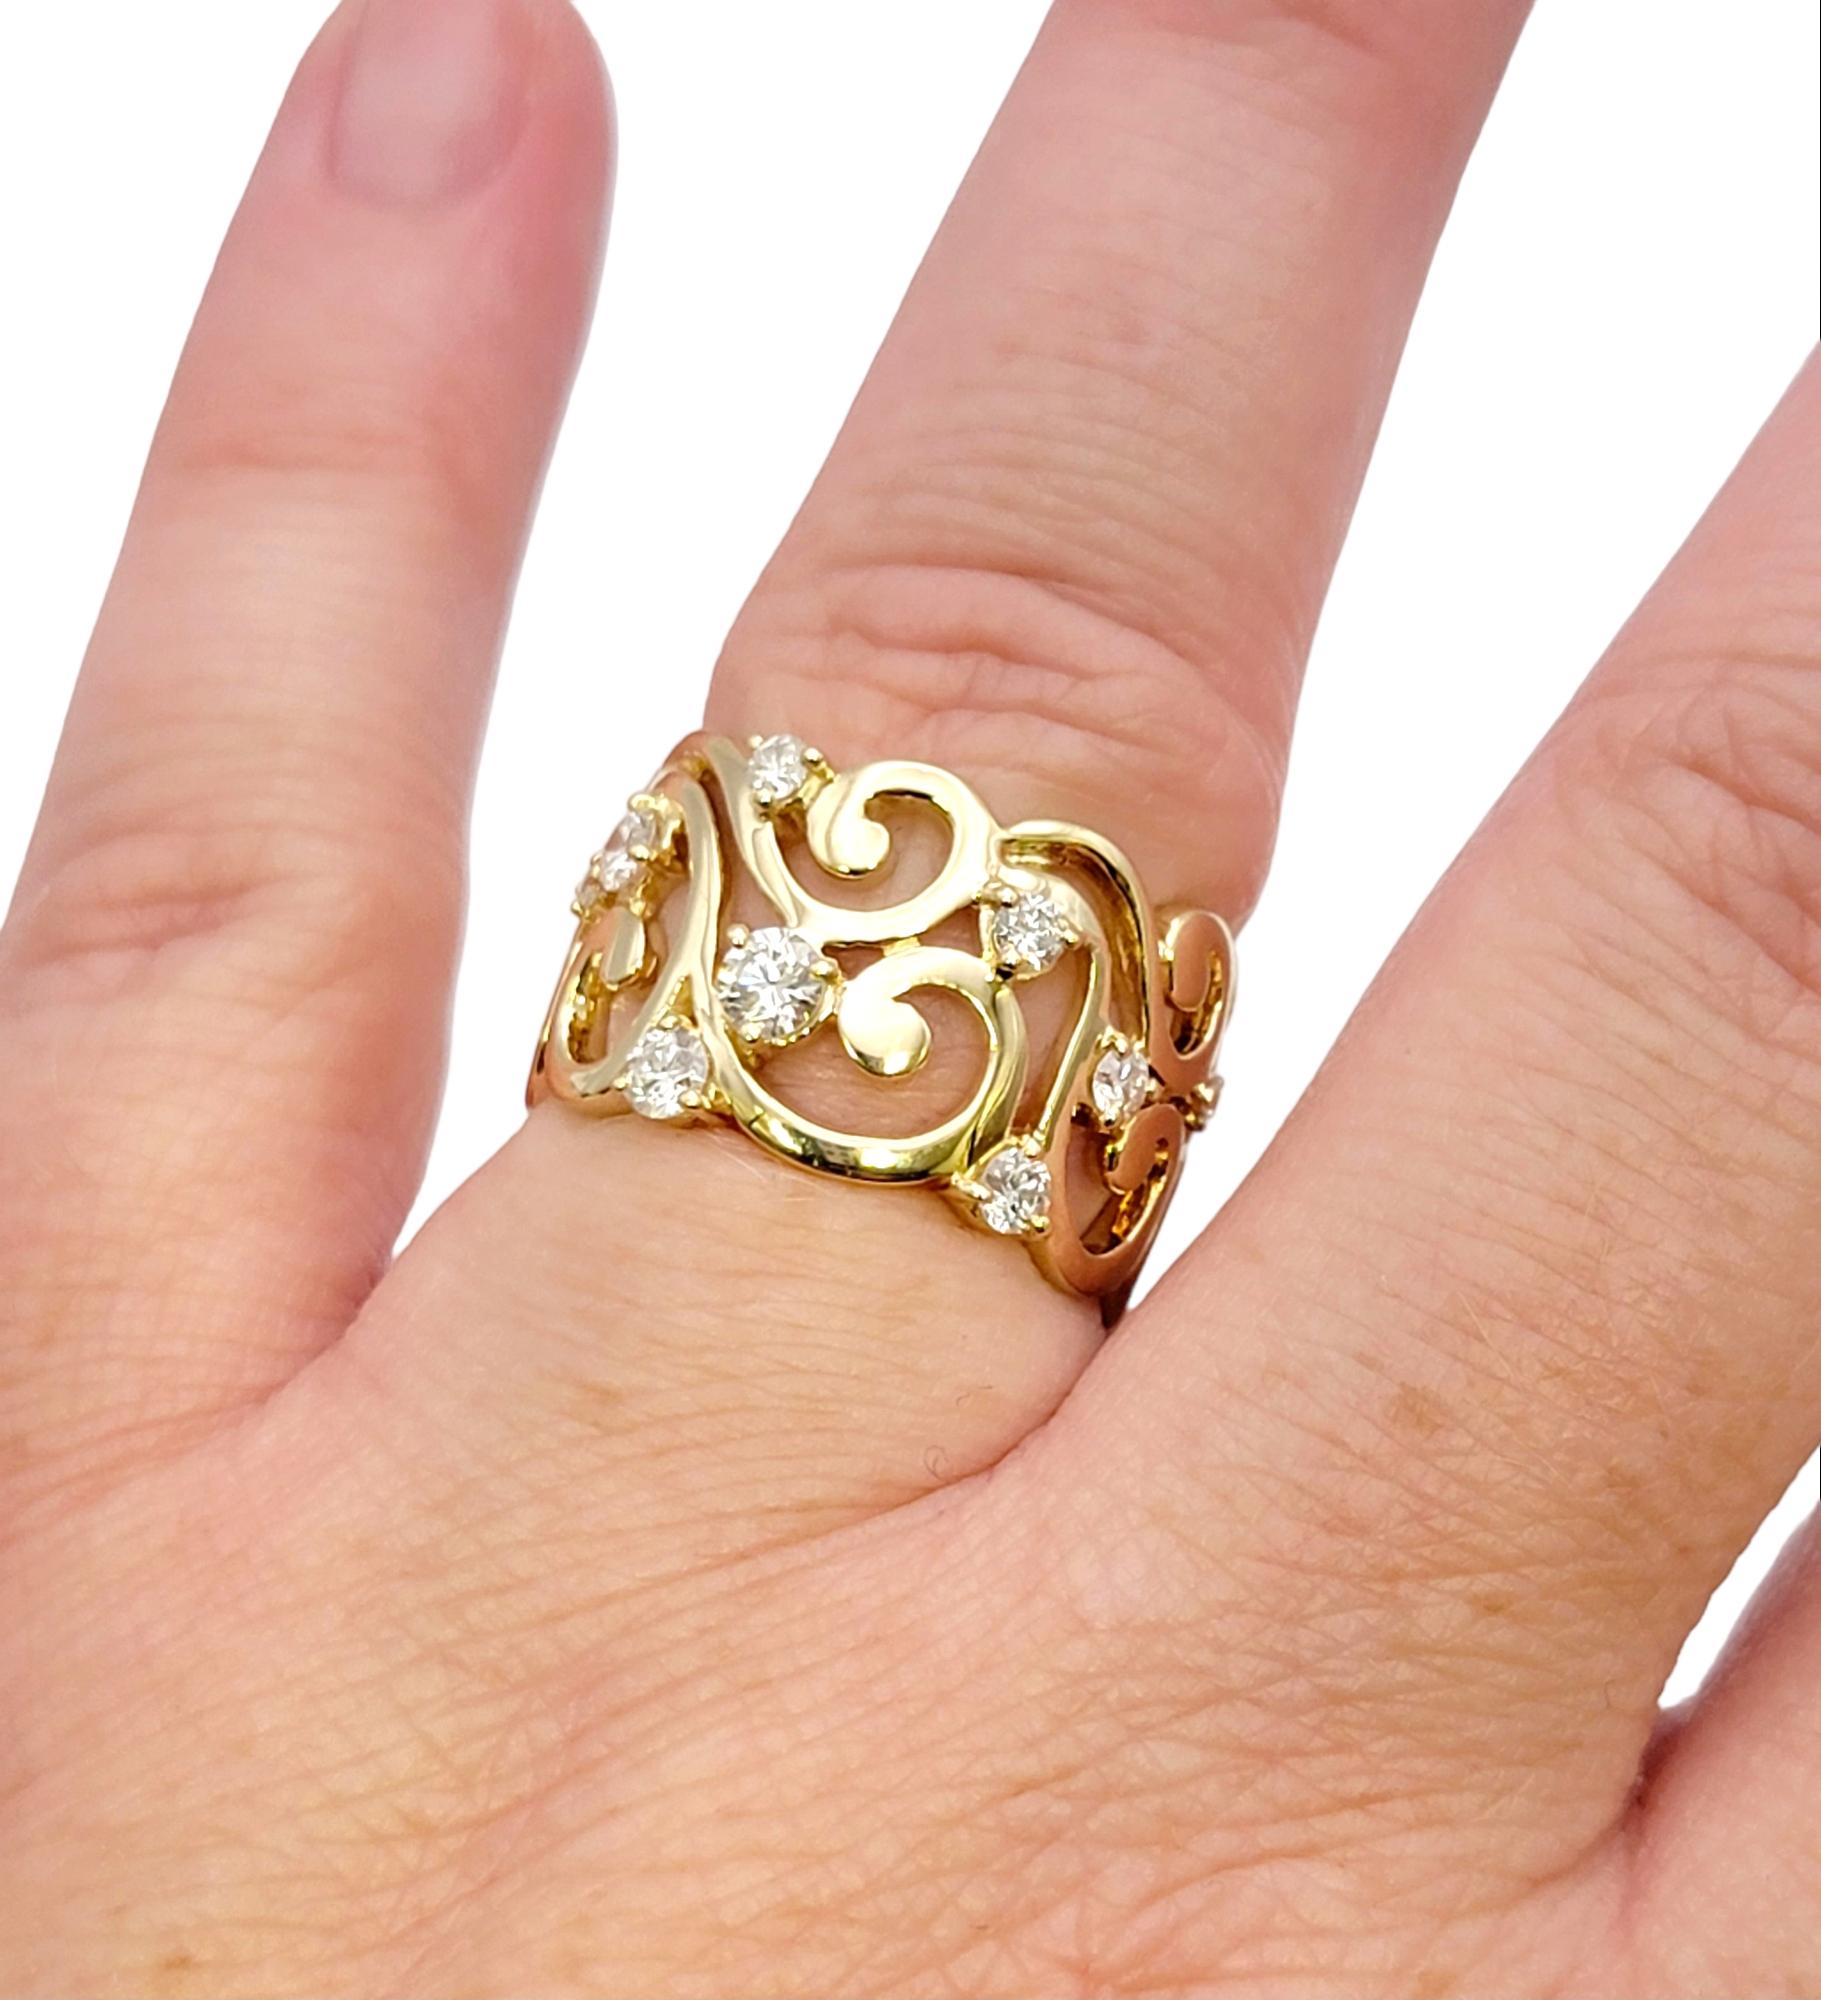 Polished 14 Karat Yellow Gold Scroll Motif Extra Wide Band Ring with Diamonds For Sale 5